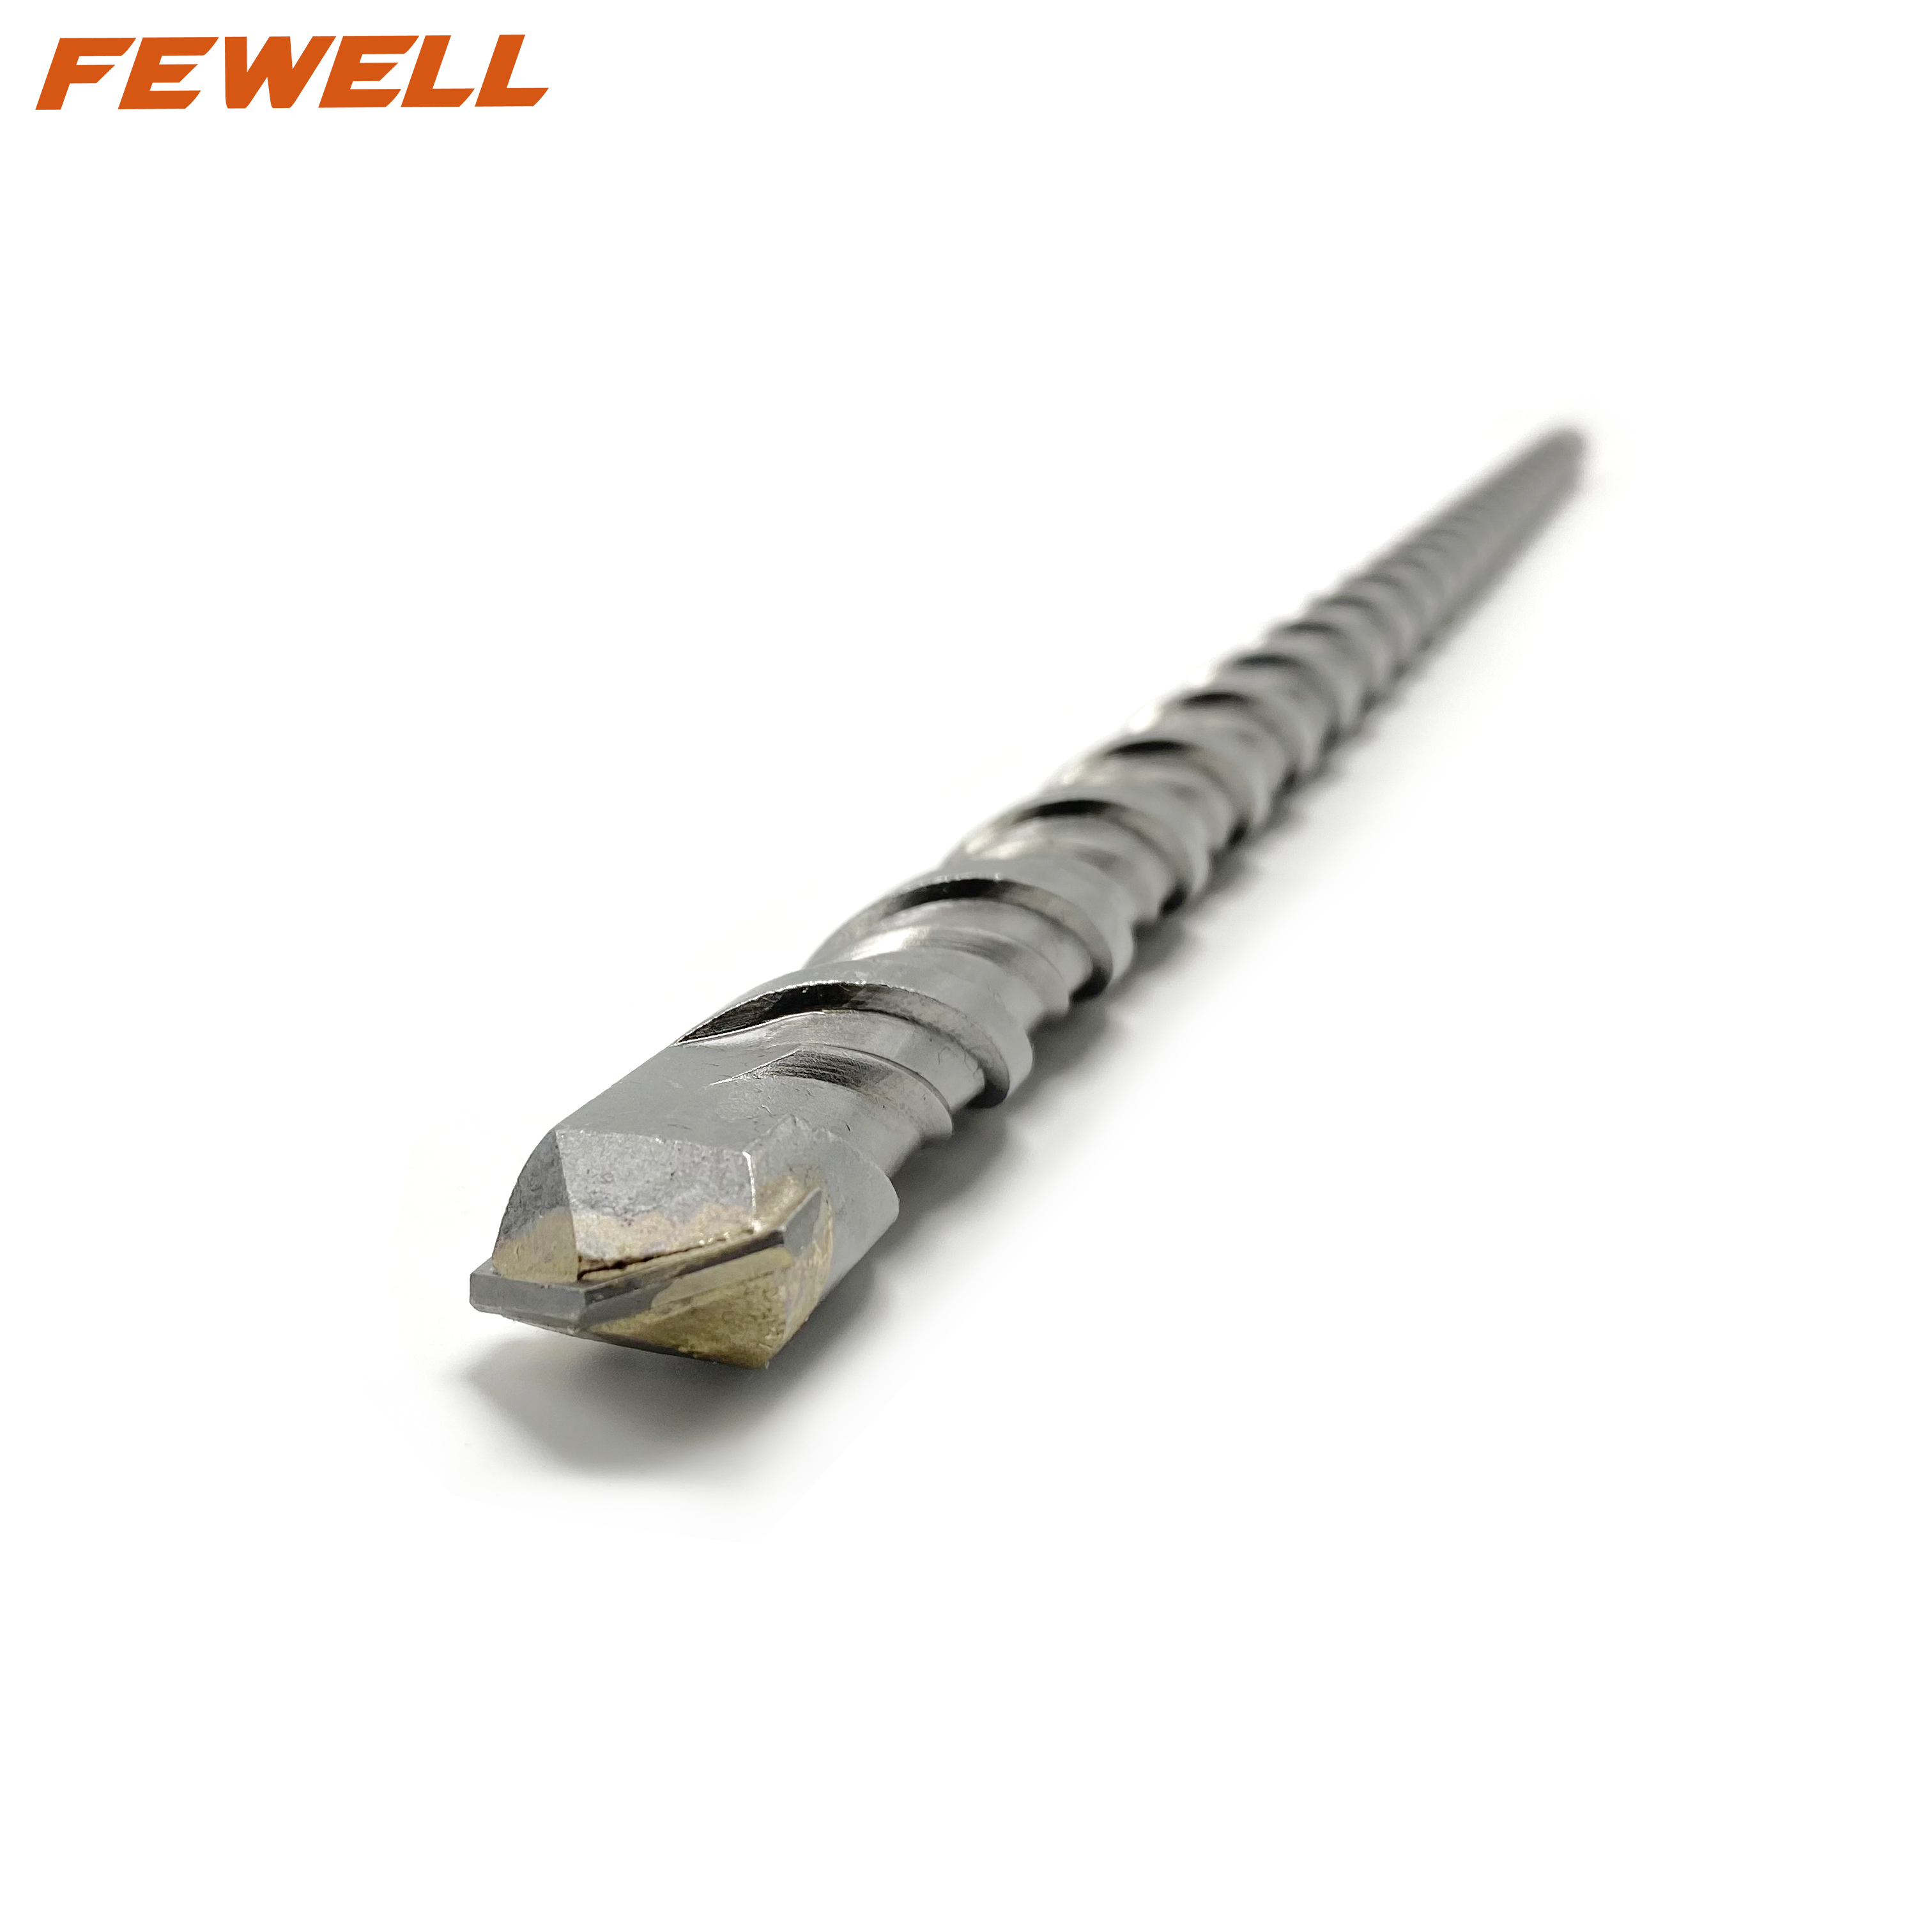 High quality SDS Plus Single Flat Tip 22*500/600/800/1000mm Double Flute Electric Hammer Drill Bit for Concrete wall Masonry Stone granite